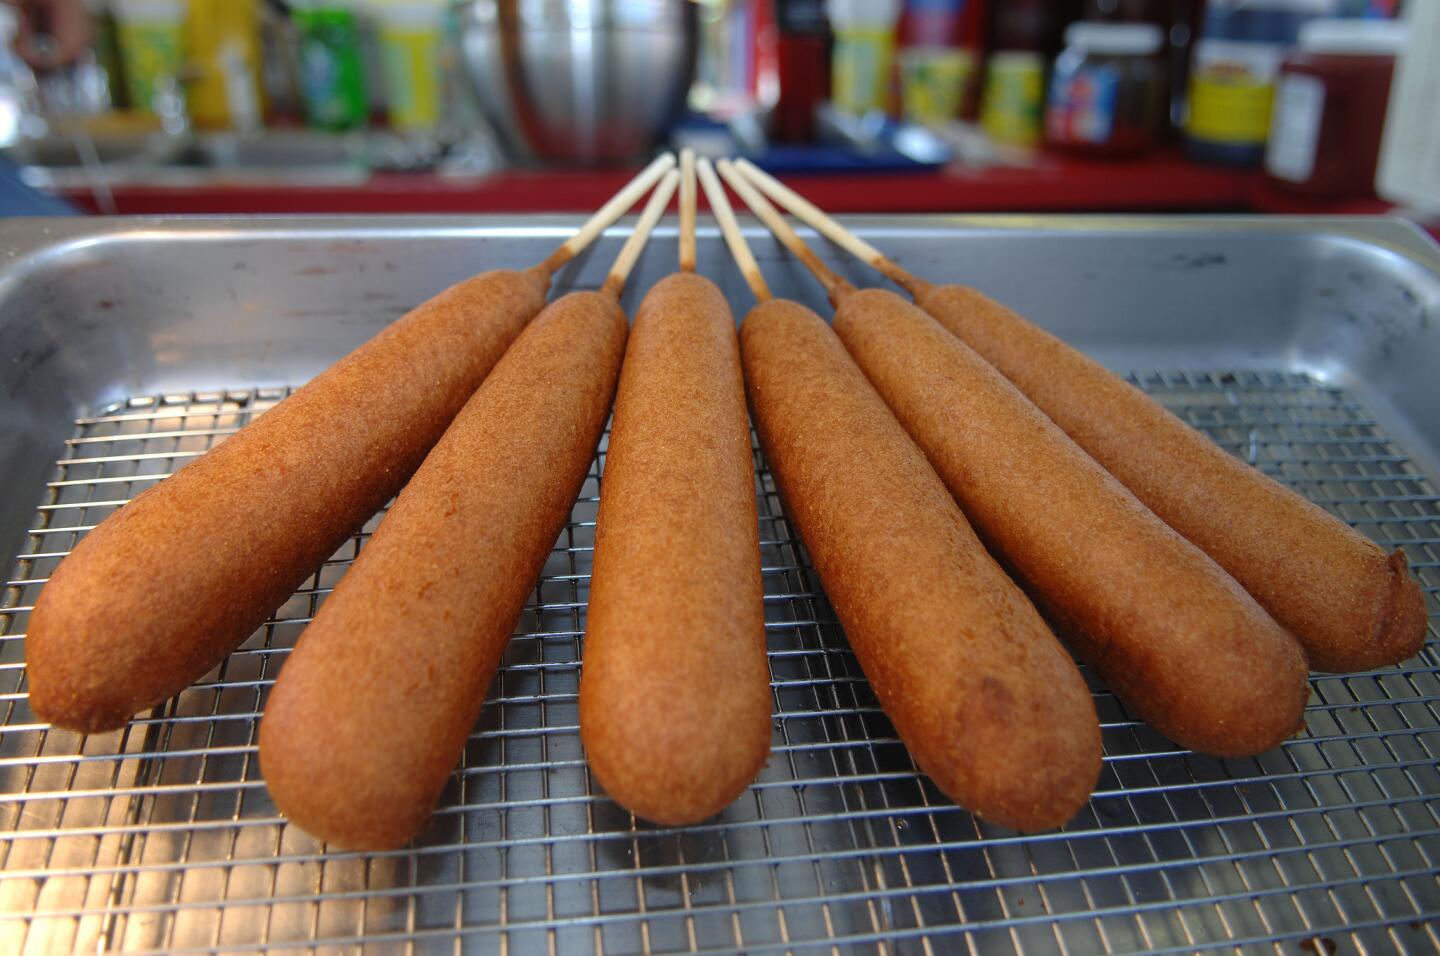 That's right, they're corndogs